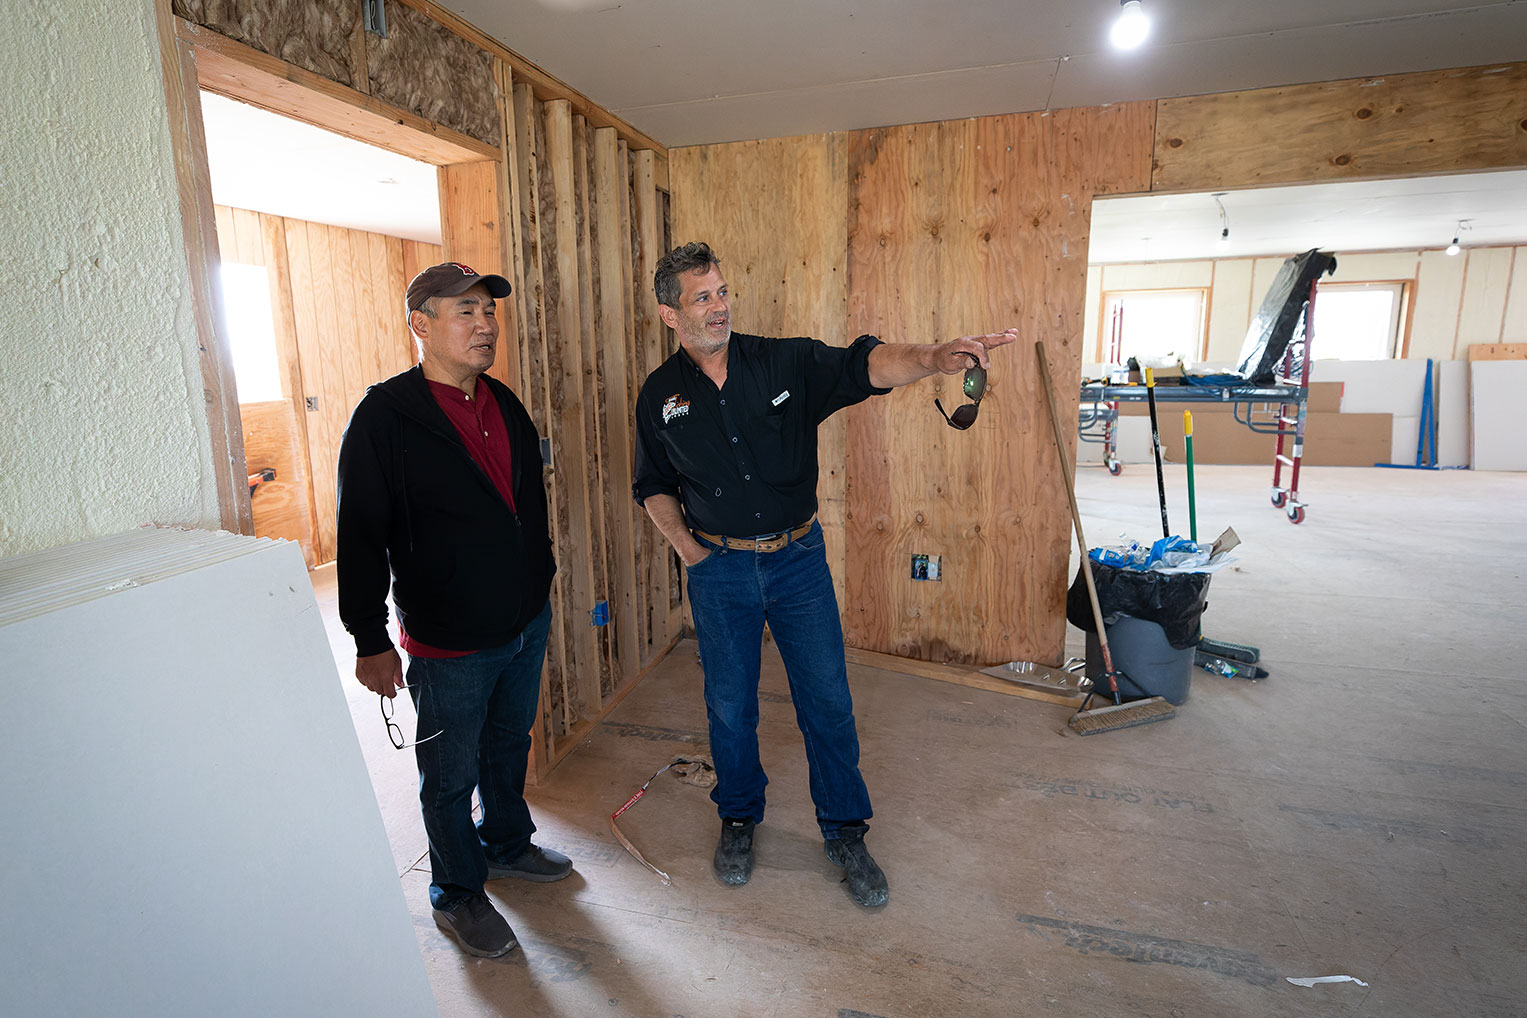 Russ Richardson, site superintendent, shows Pastor Don Cross some of the winter-worthy features of the new building in the weeks leading up to its completion.